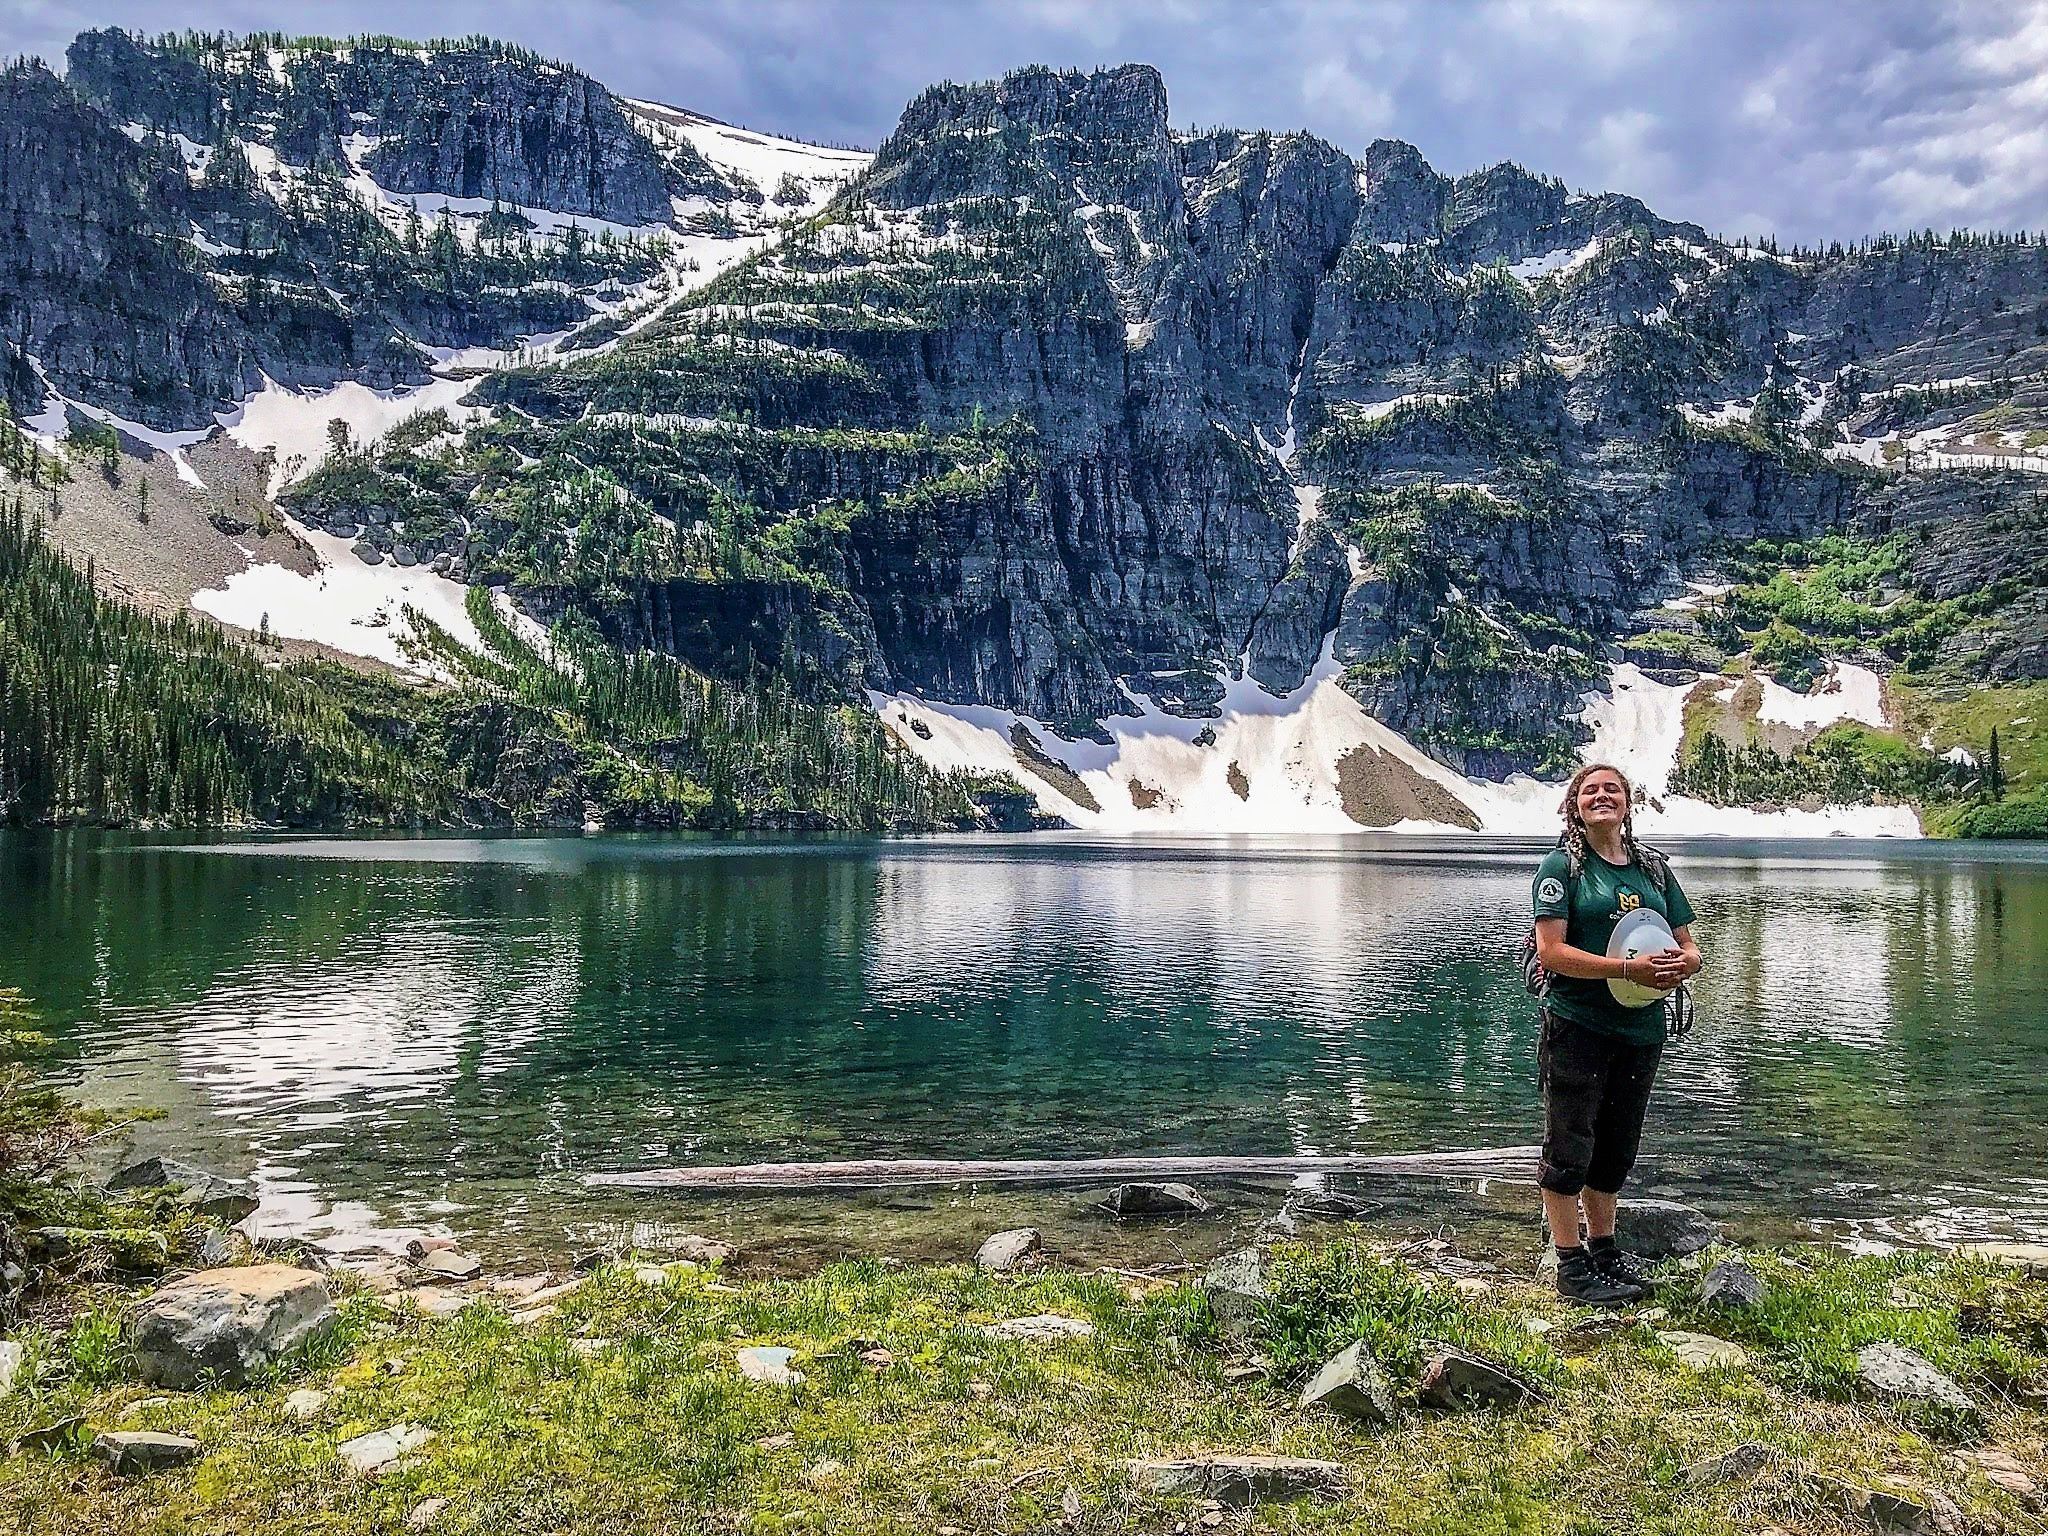 [Image Description: One MCC member stands in front of a turquoise lake, with a peak in the background, covered in a dusting of snow. The member is standing on the edge of the lake in their uniform, holding their hard hat.] 